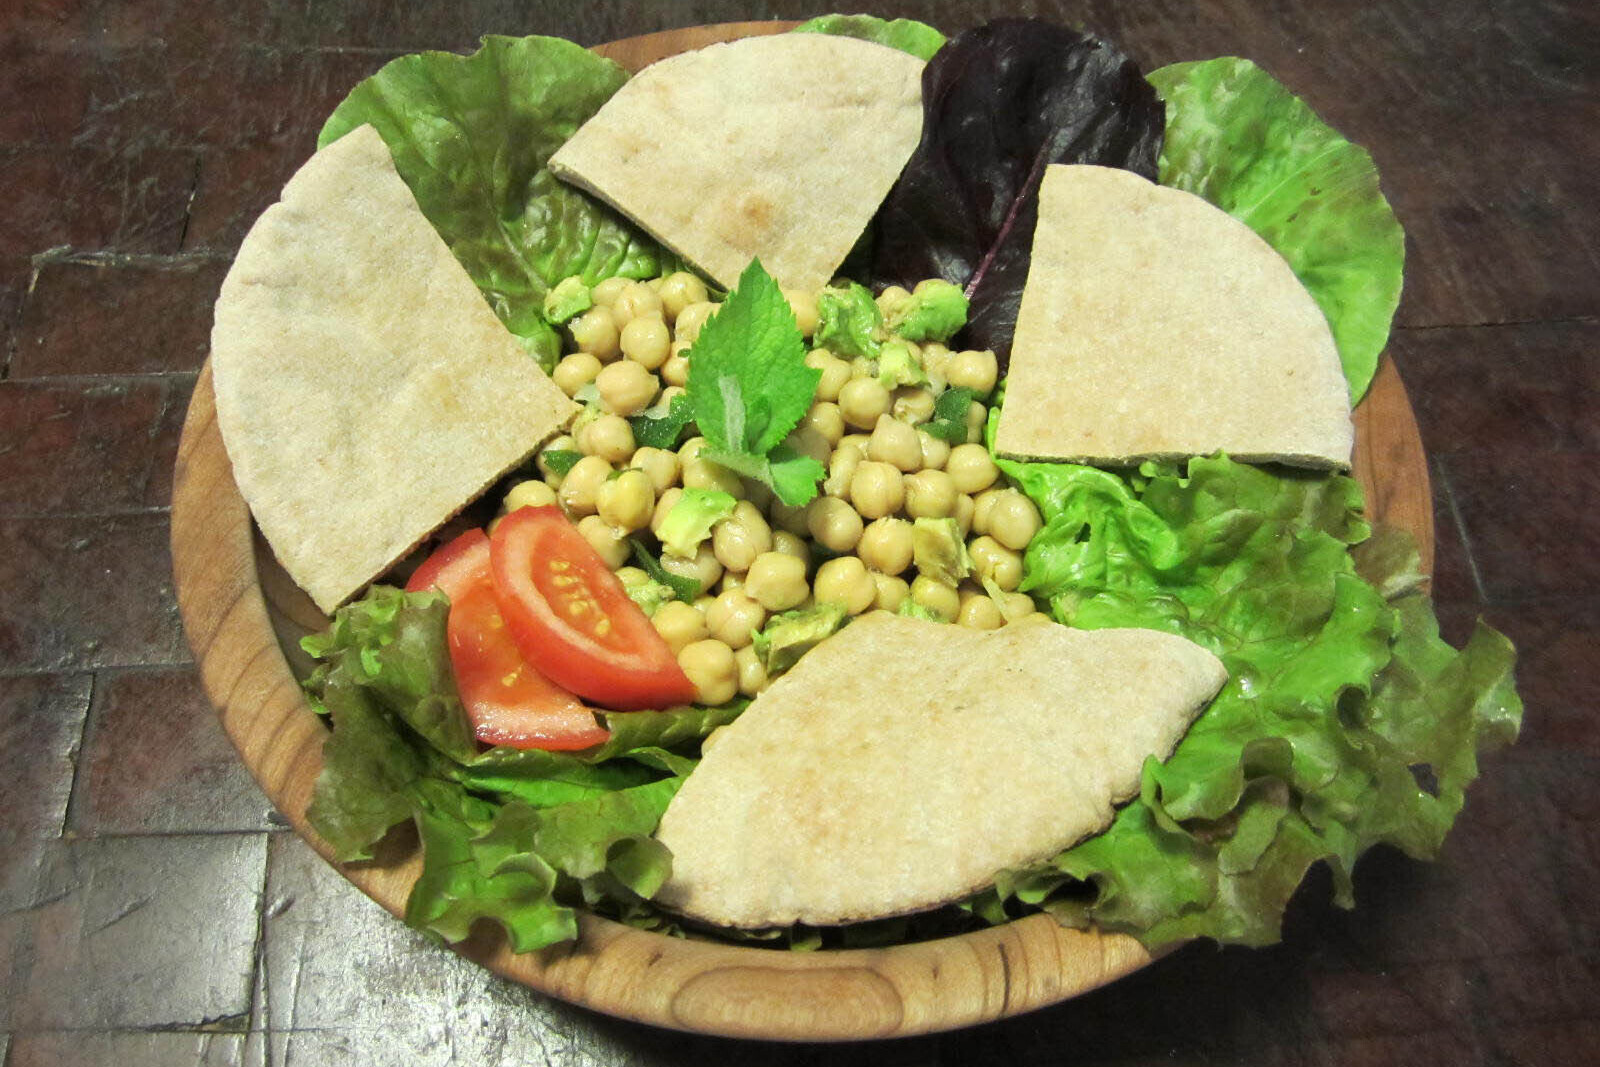 Bed of lettuce with chickpeas, sliced tomato, and pita bread